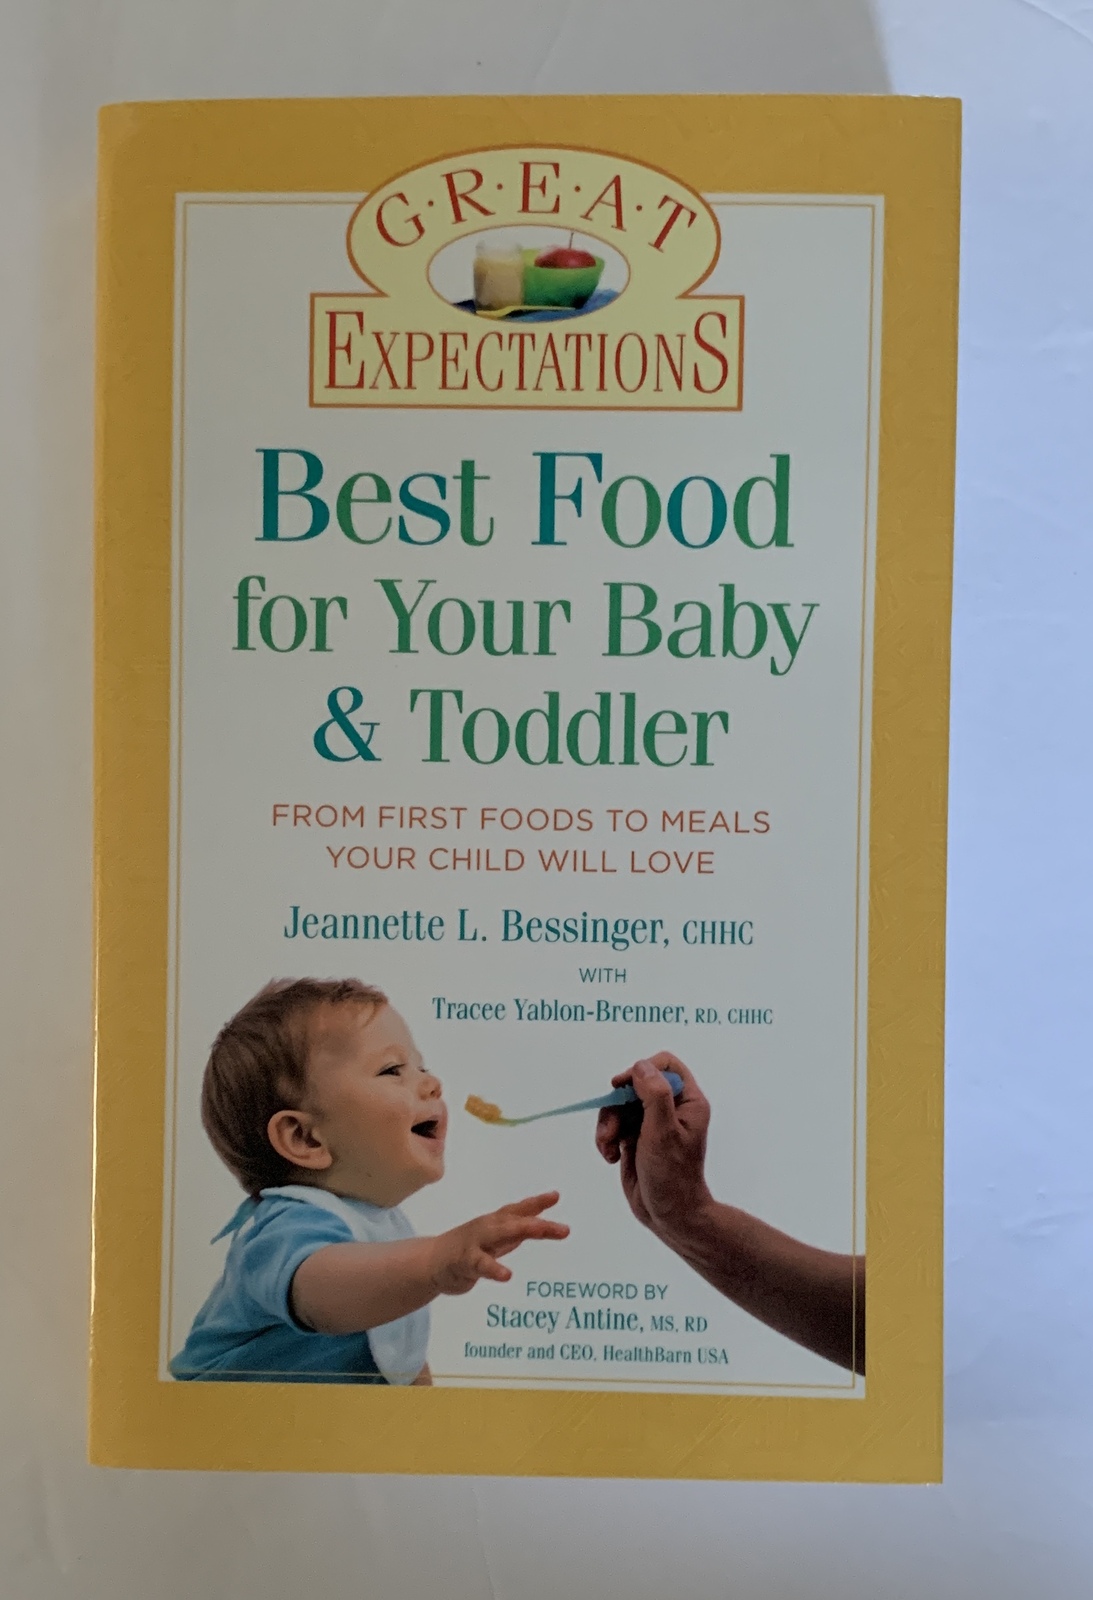 Primary image for Great Expectations Best Food for Your Baby & Toddler by Jeannette Bessinger